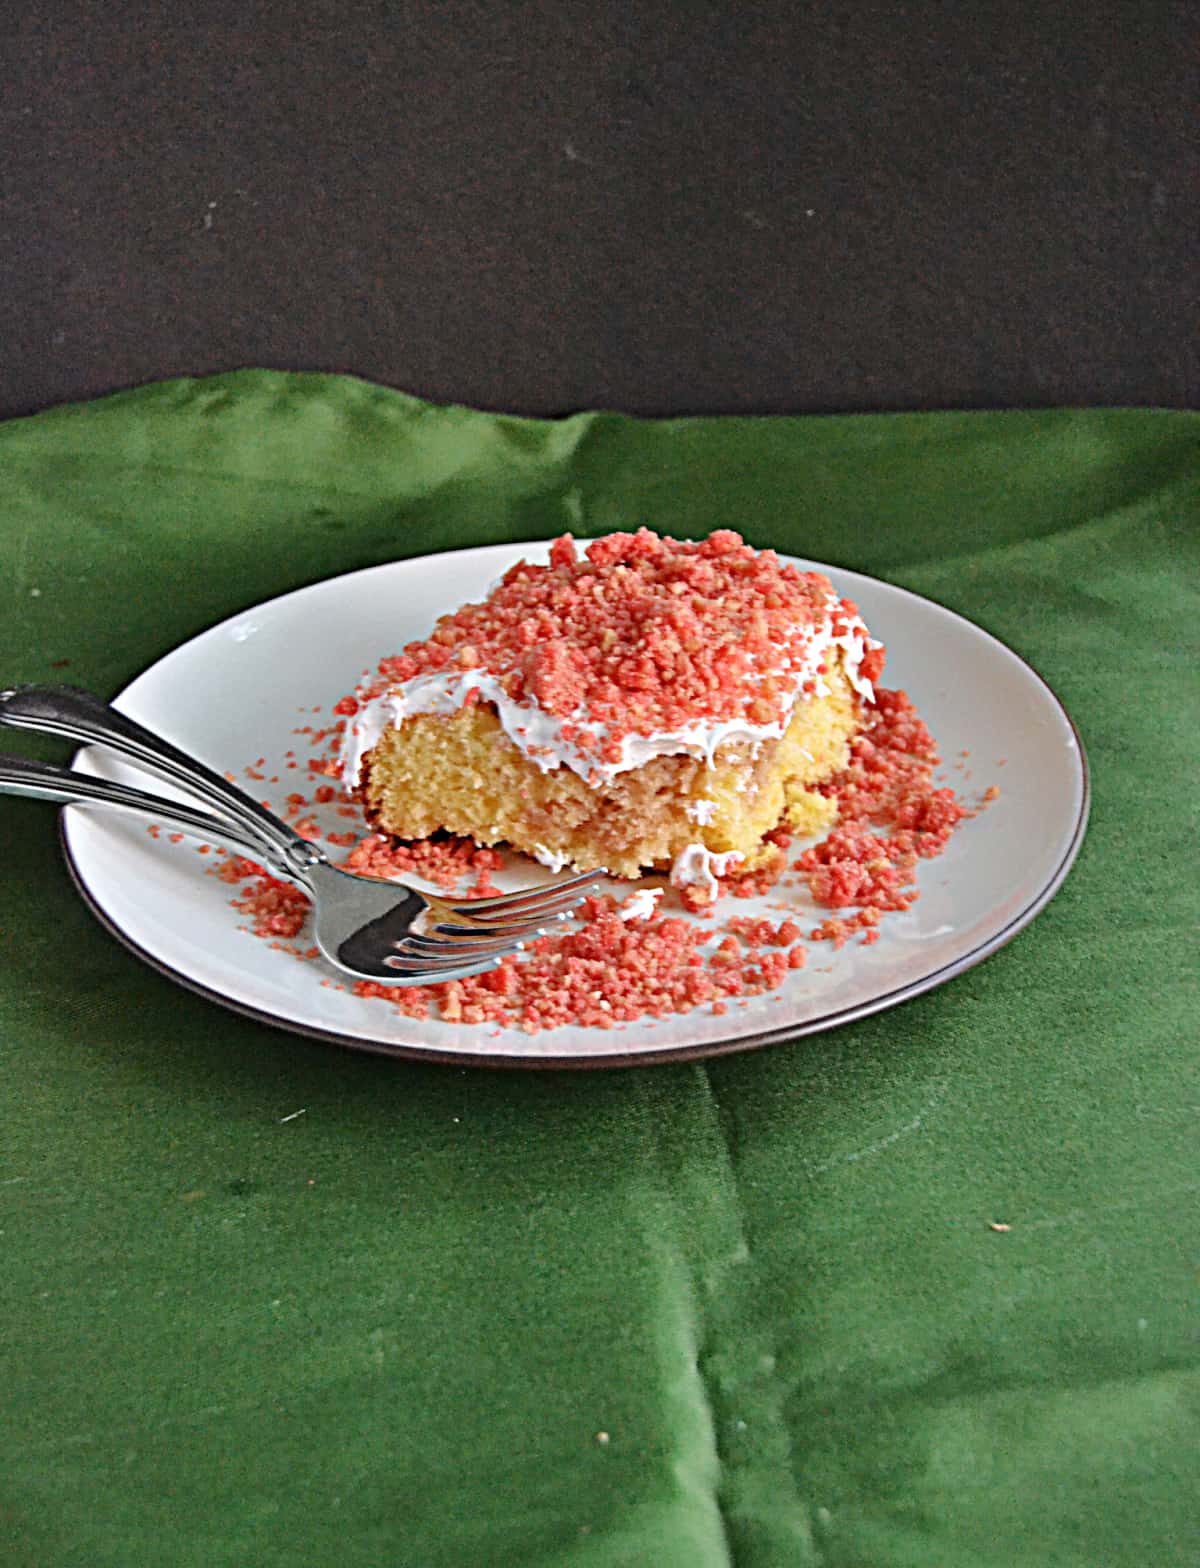 A slice of Strawberry Scooter Crunch Cake on a plate.